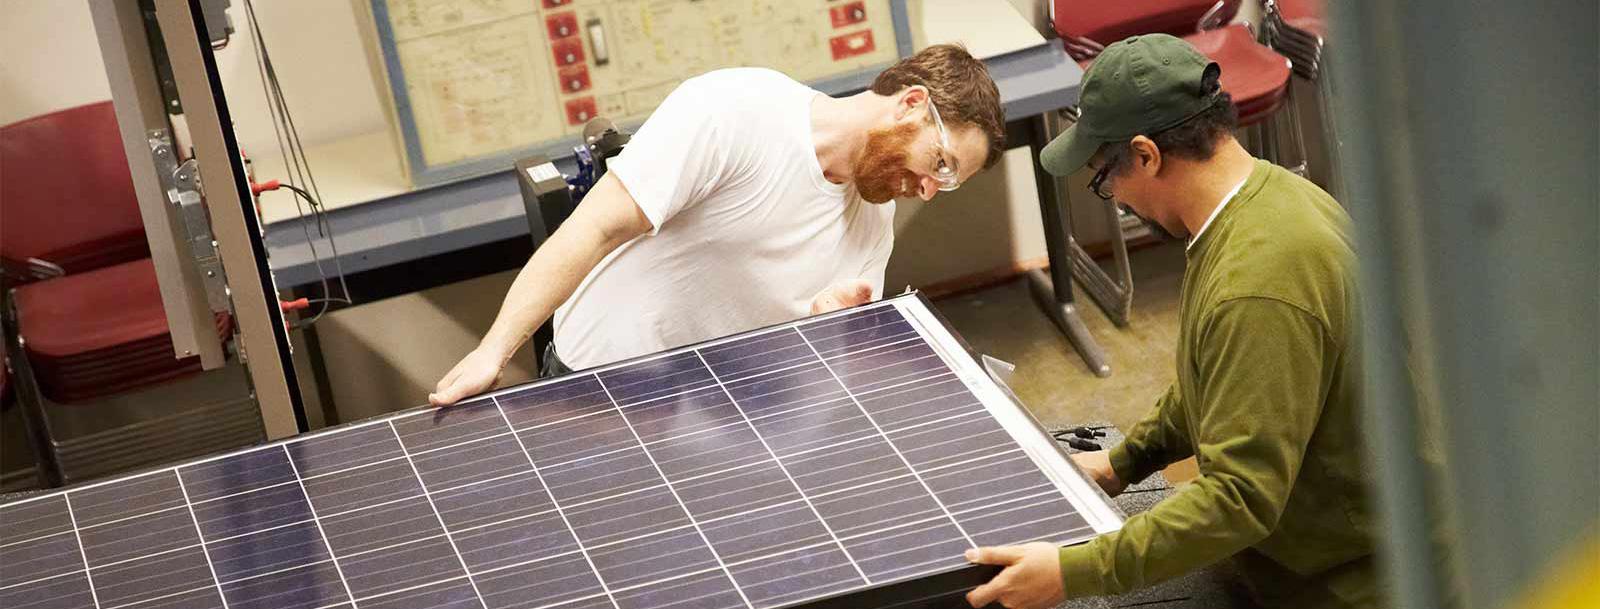 Two workers on a solar panel